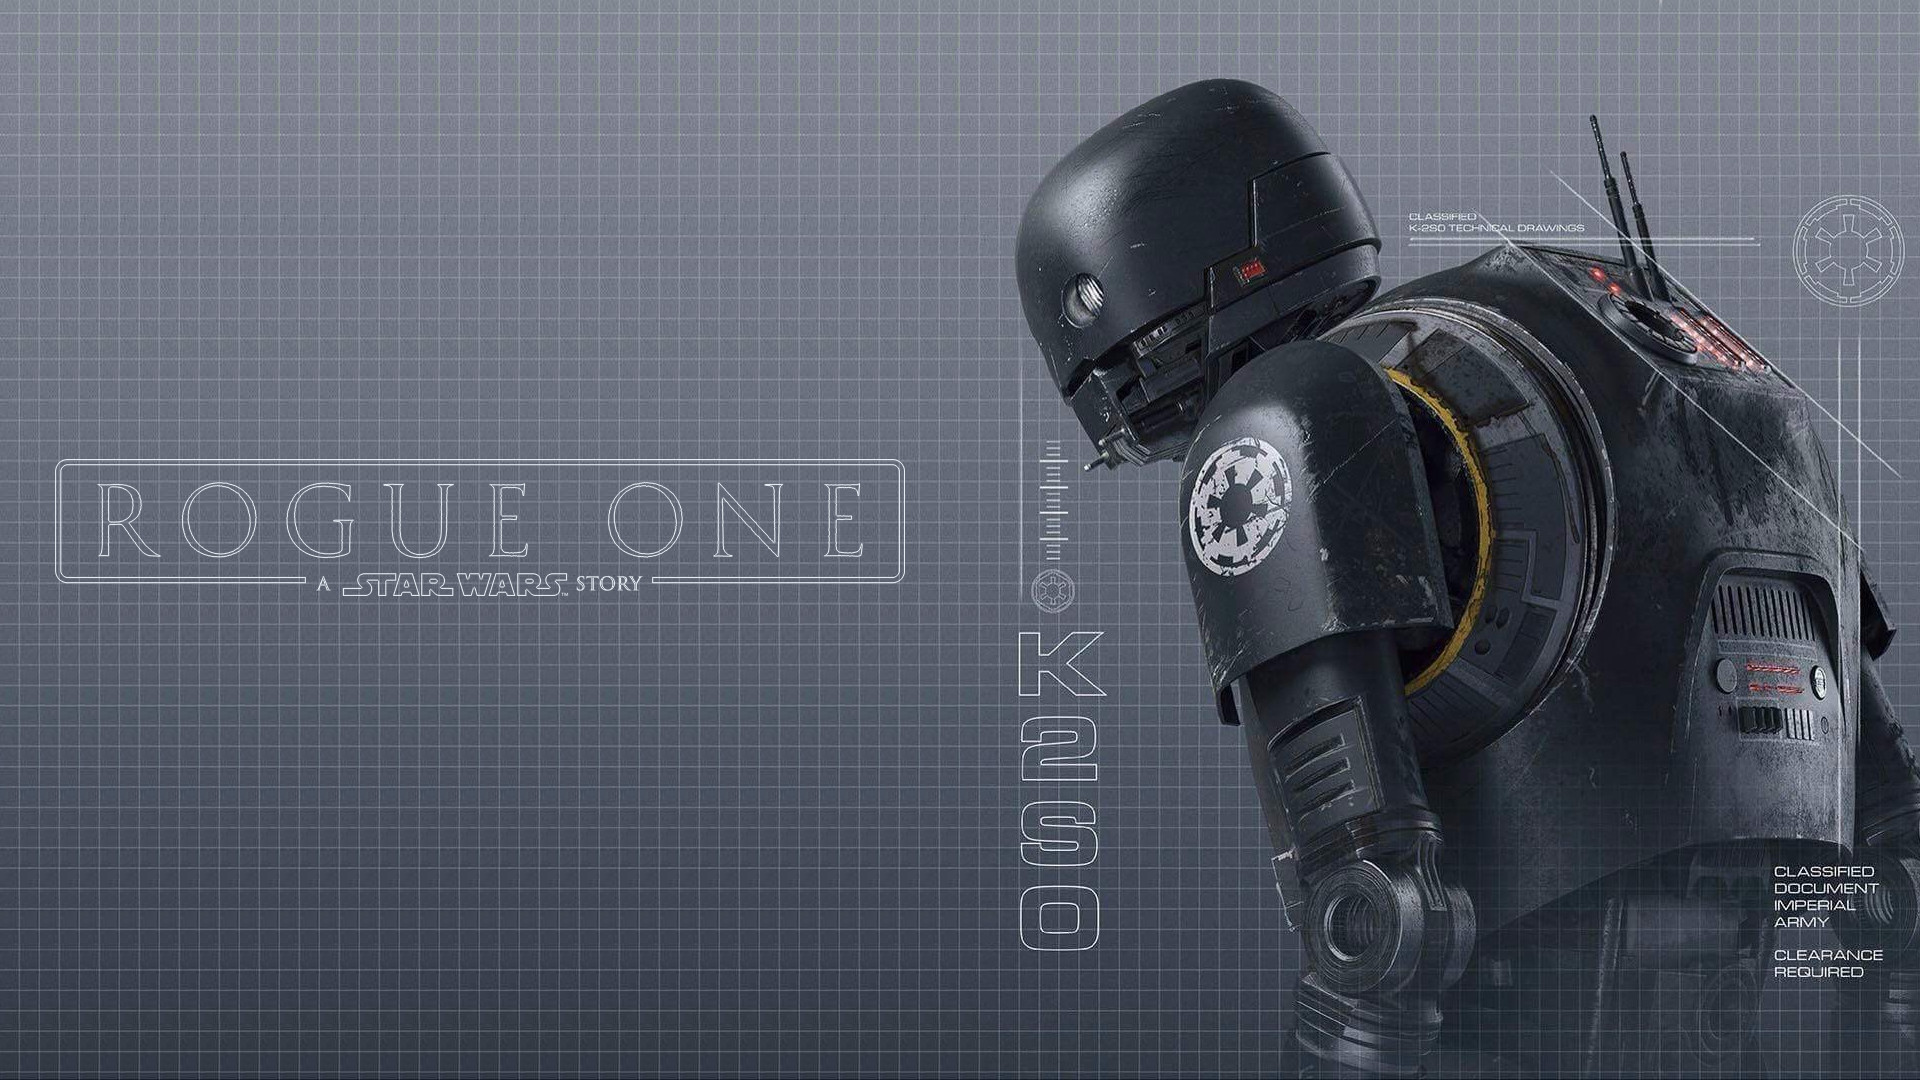 A wallpaper version of the Rogue One A Star Wars Story cover of Empire Magazine version Rogue One Empire Magazine wallpaper 3